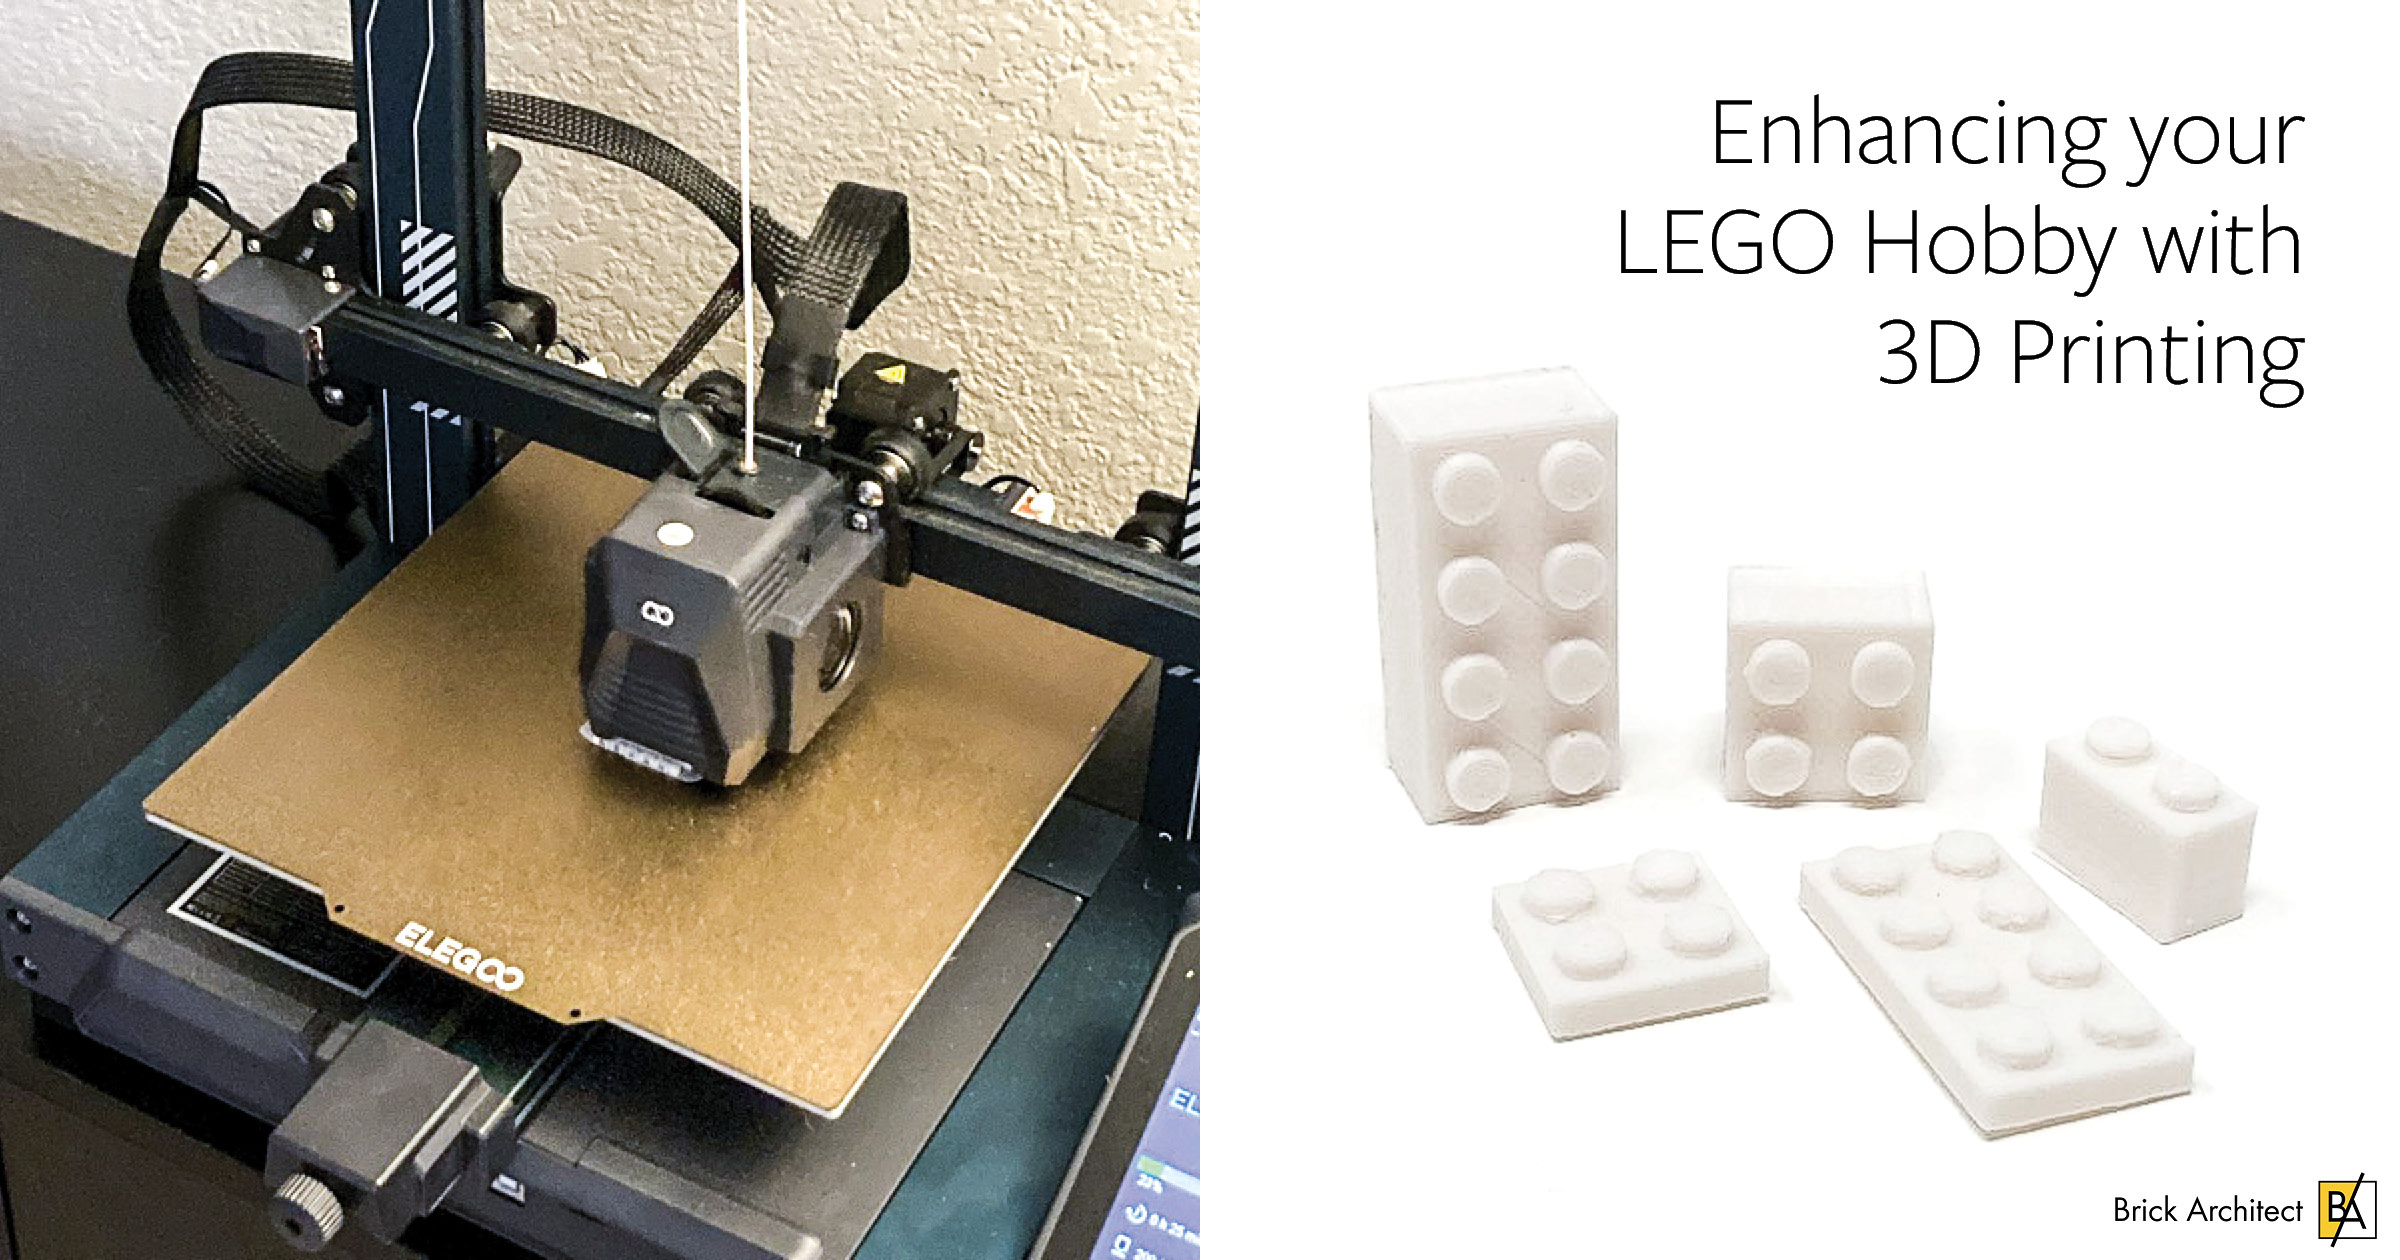 Enhancing your LEGO Hobby with 3D printing